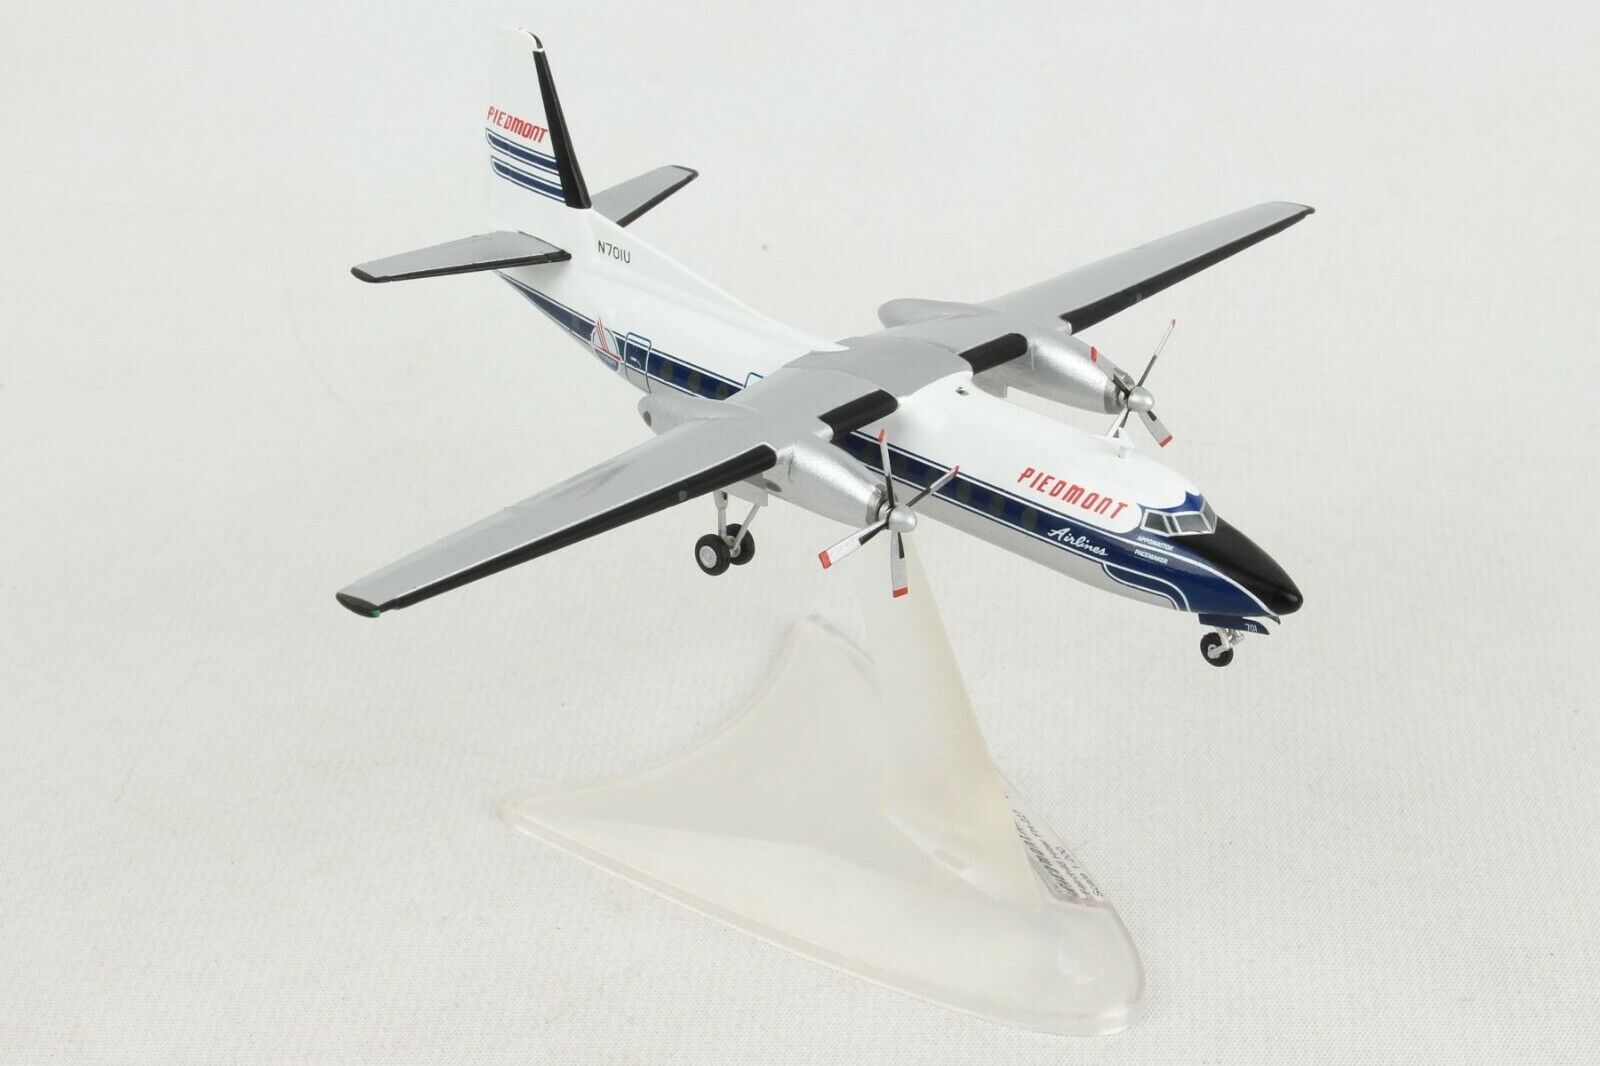 HERPA (HE559836) PIEDMONT AIRLINES FH227 1:200 SCALE DIECAST METAL MODEL